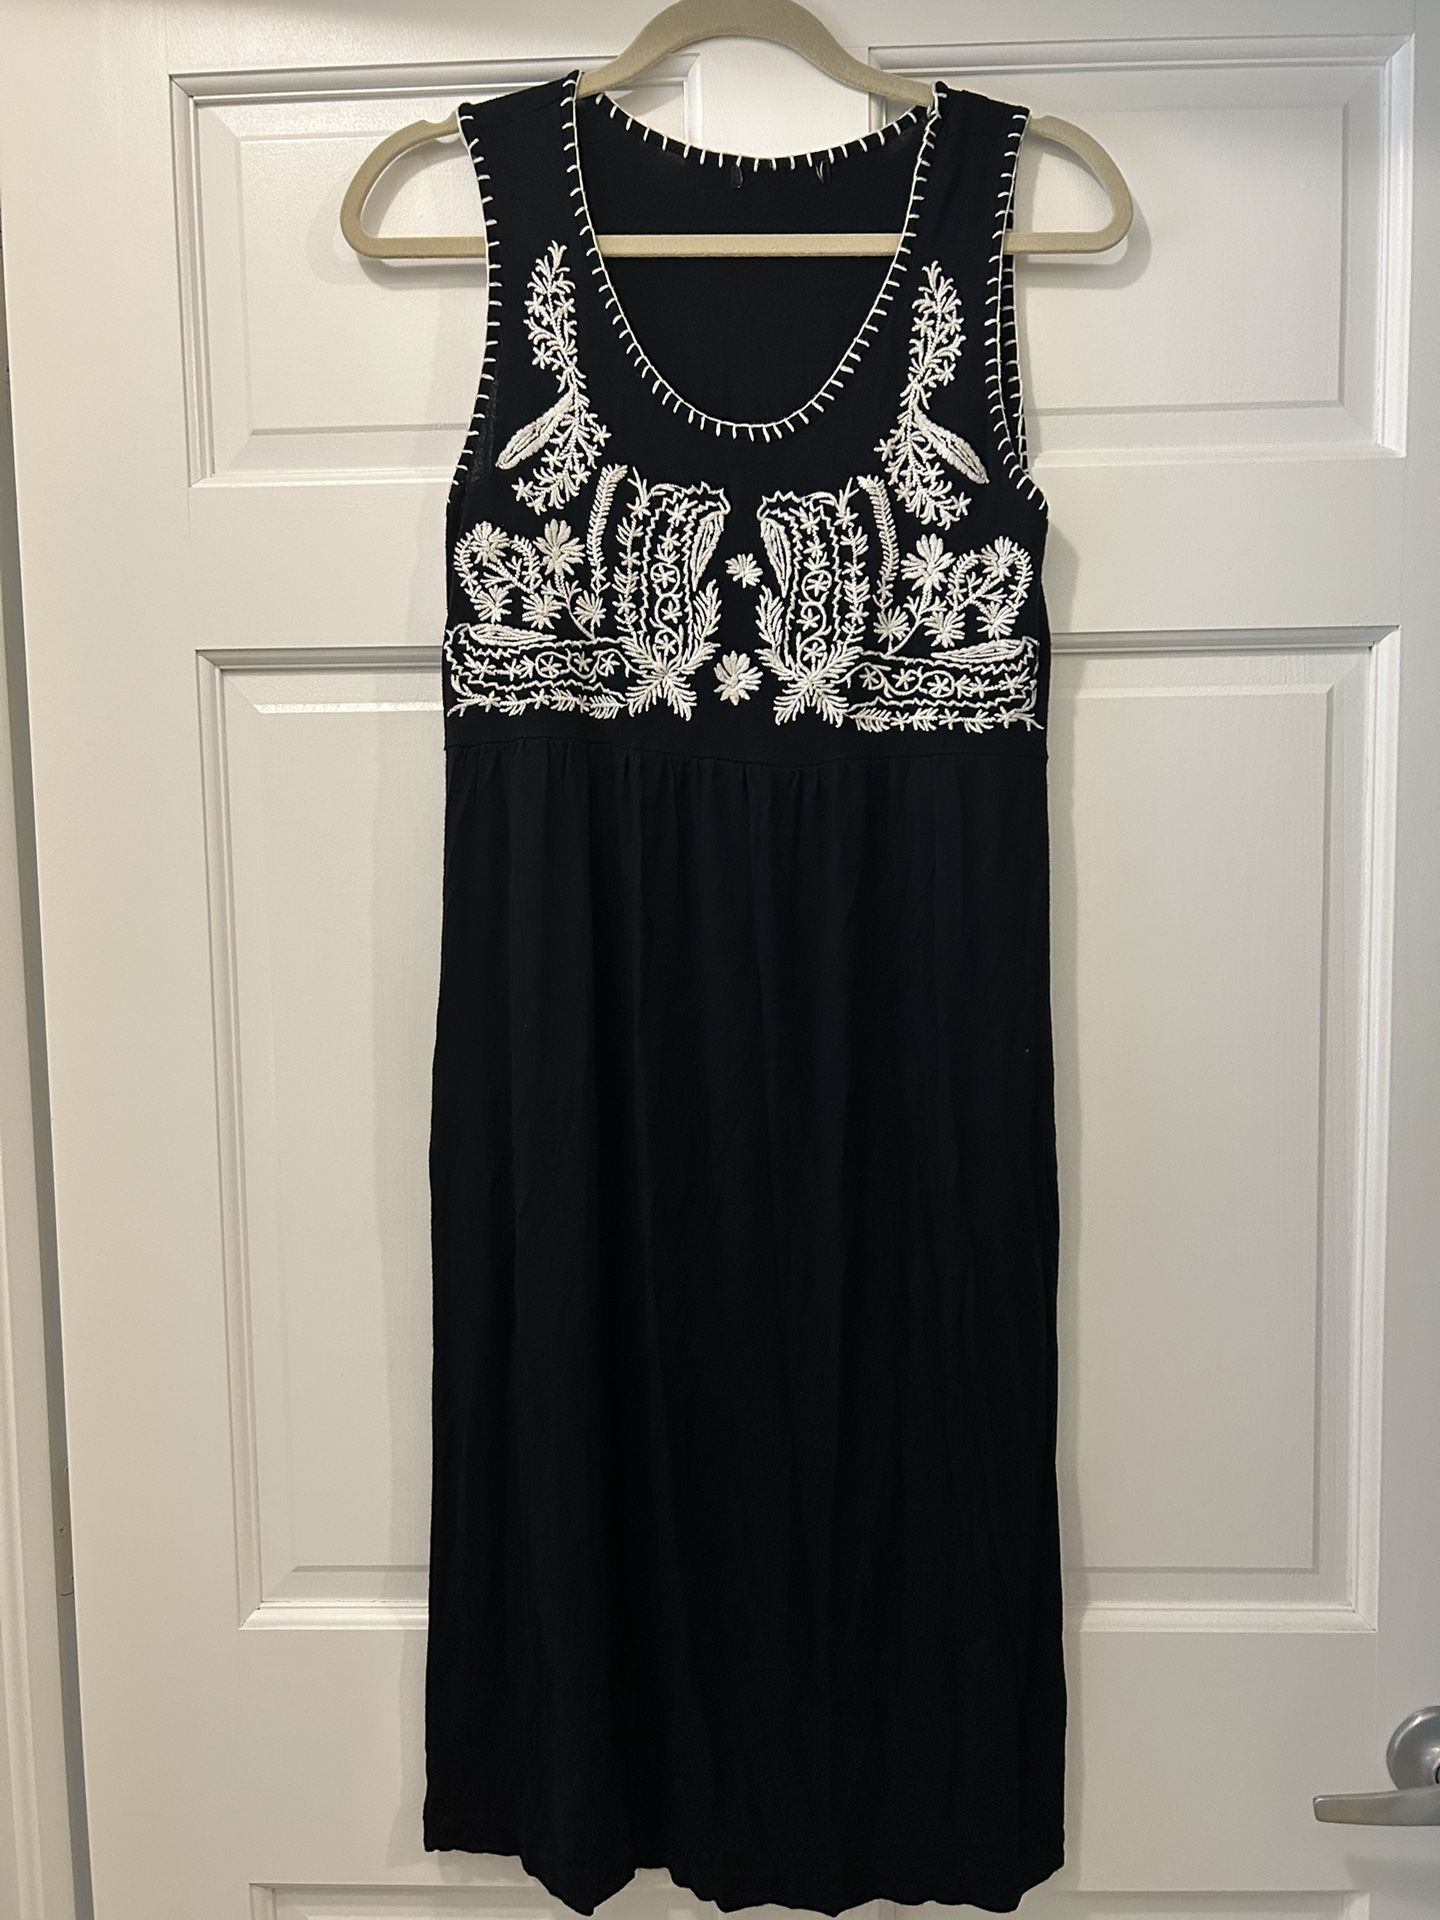 Casual black dress embroidered in white 